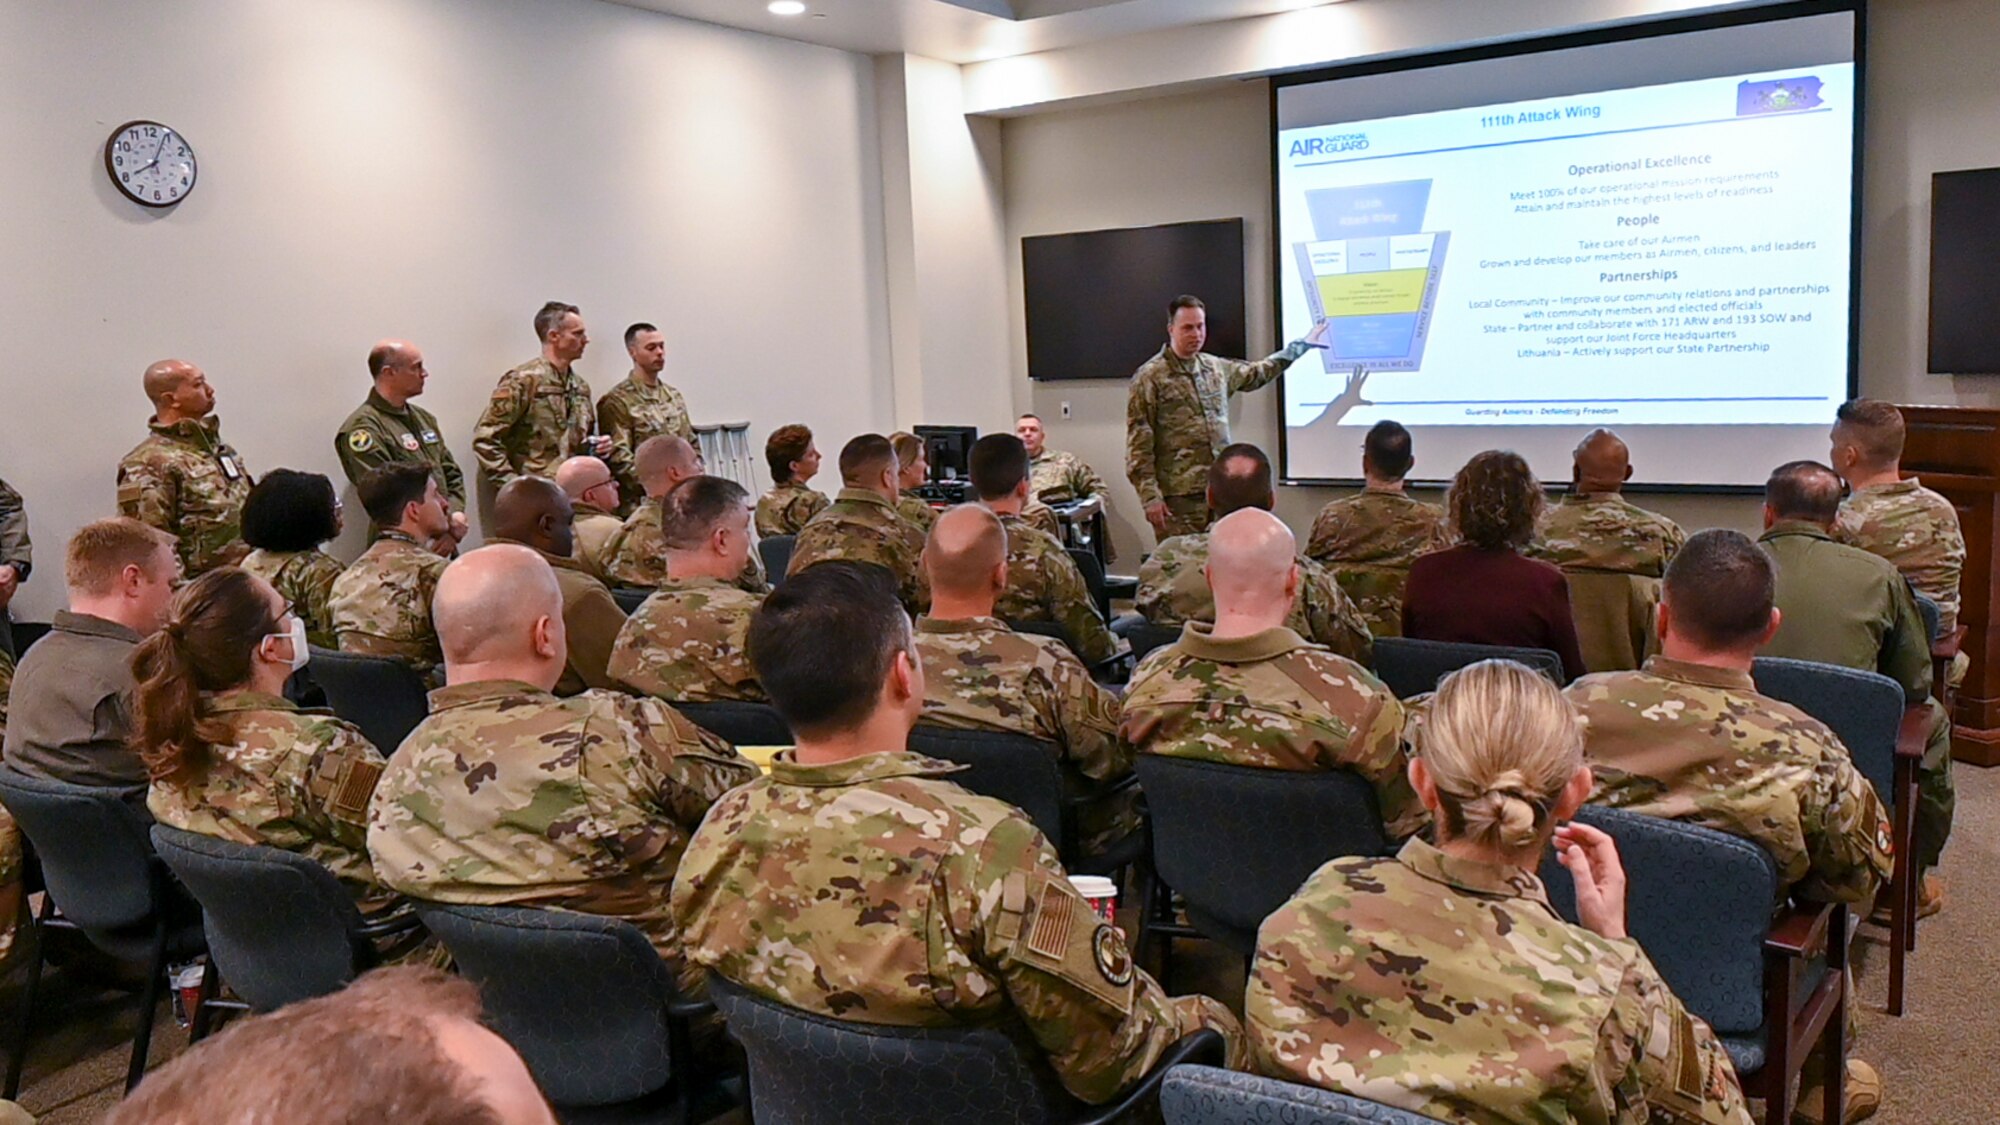 Uniformed military man gestures toward briefing slide while addressing assembled group of military and civilian personnel.